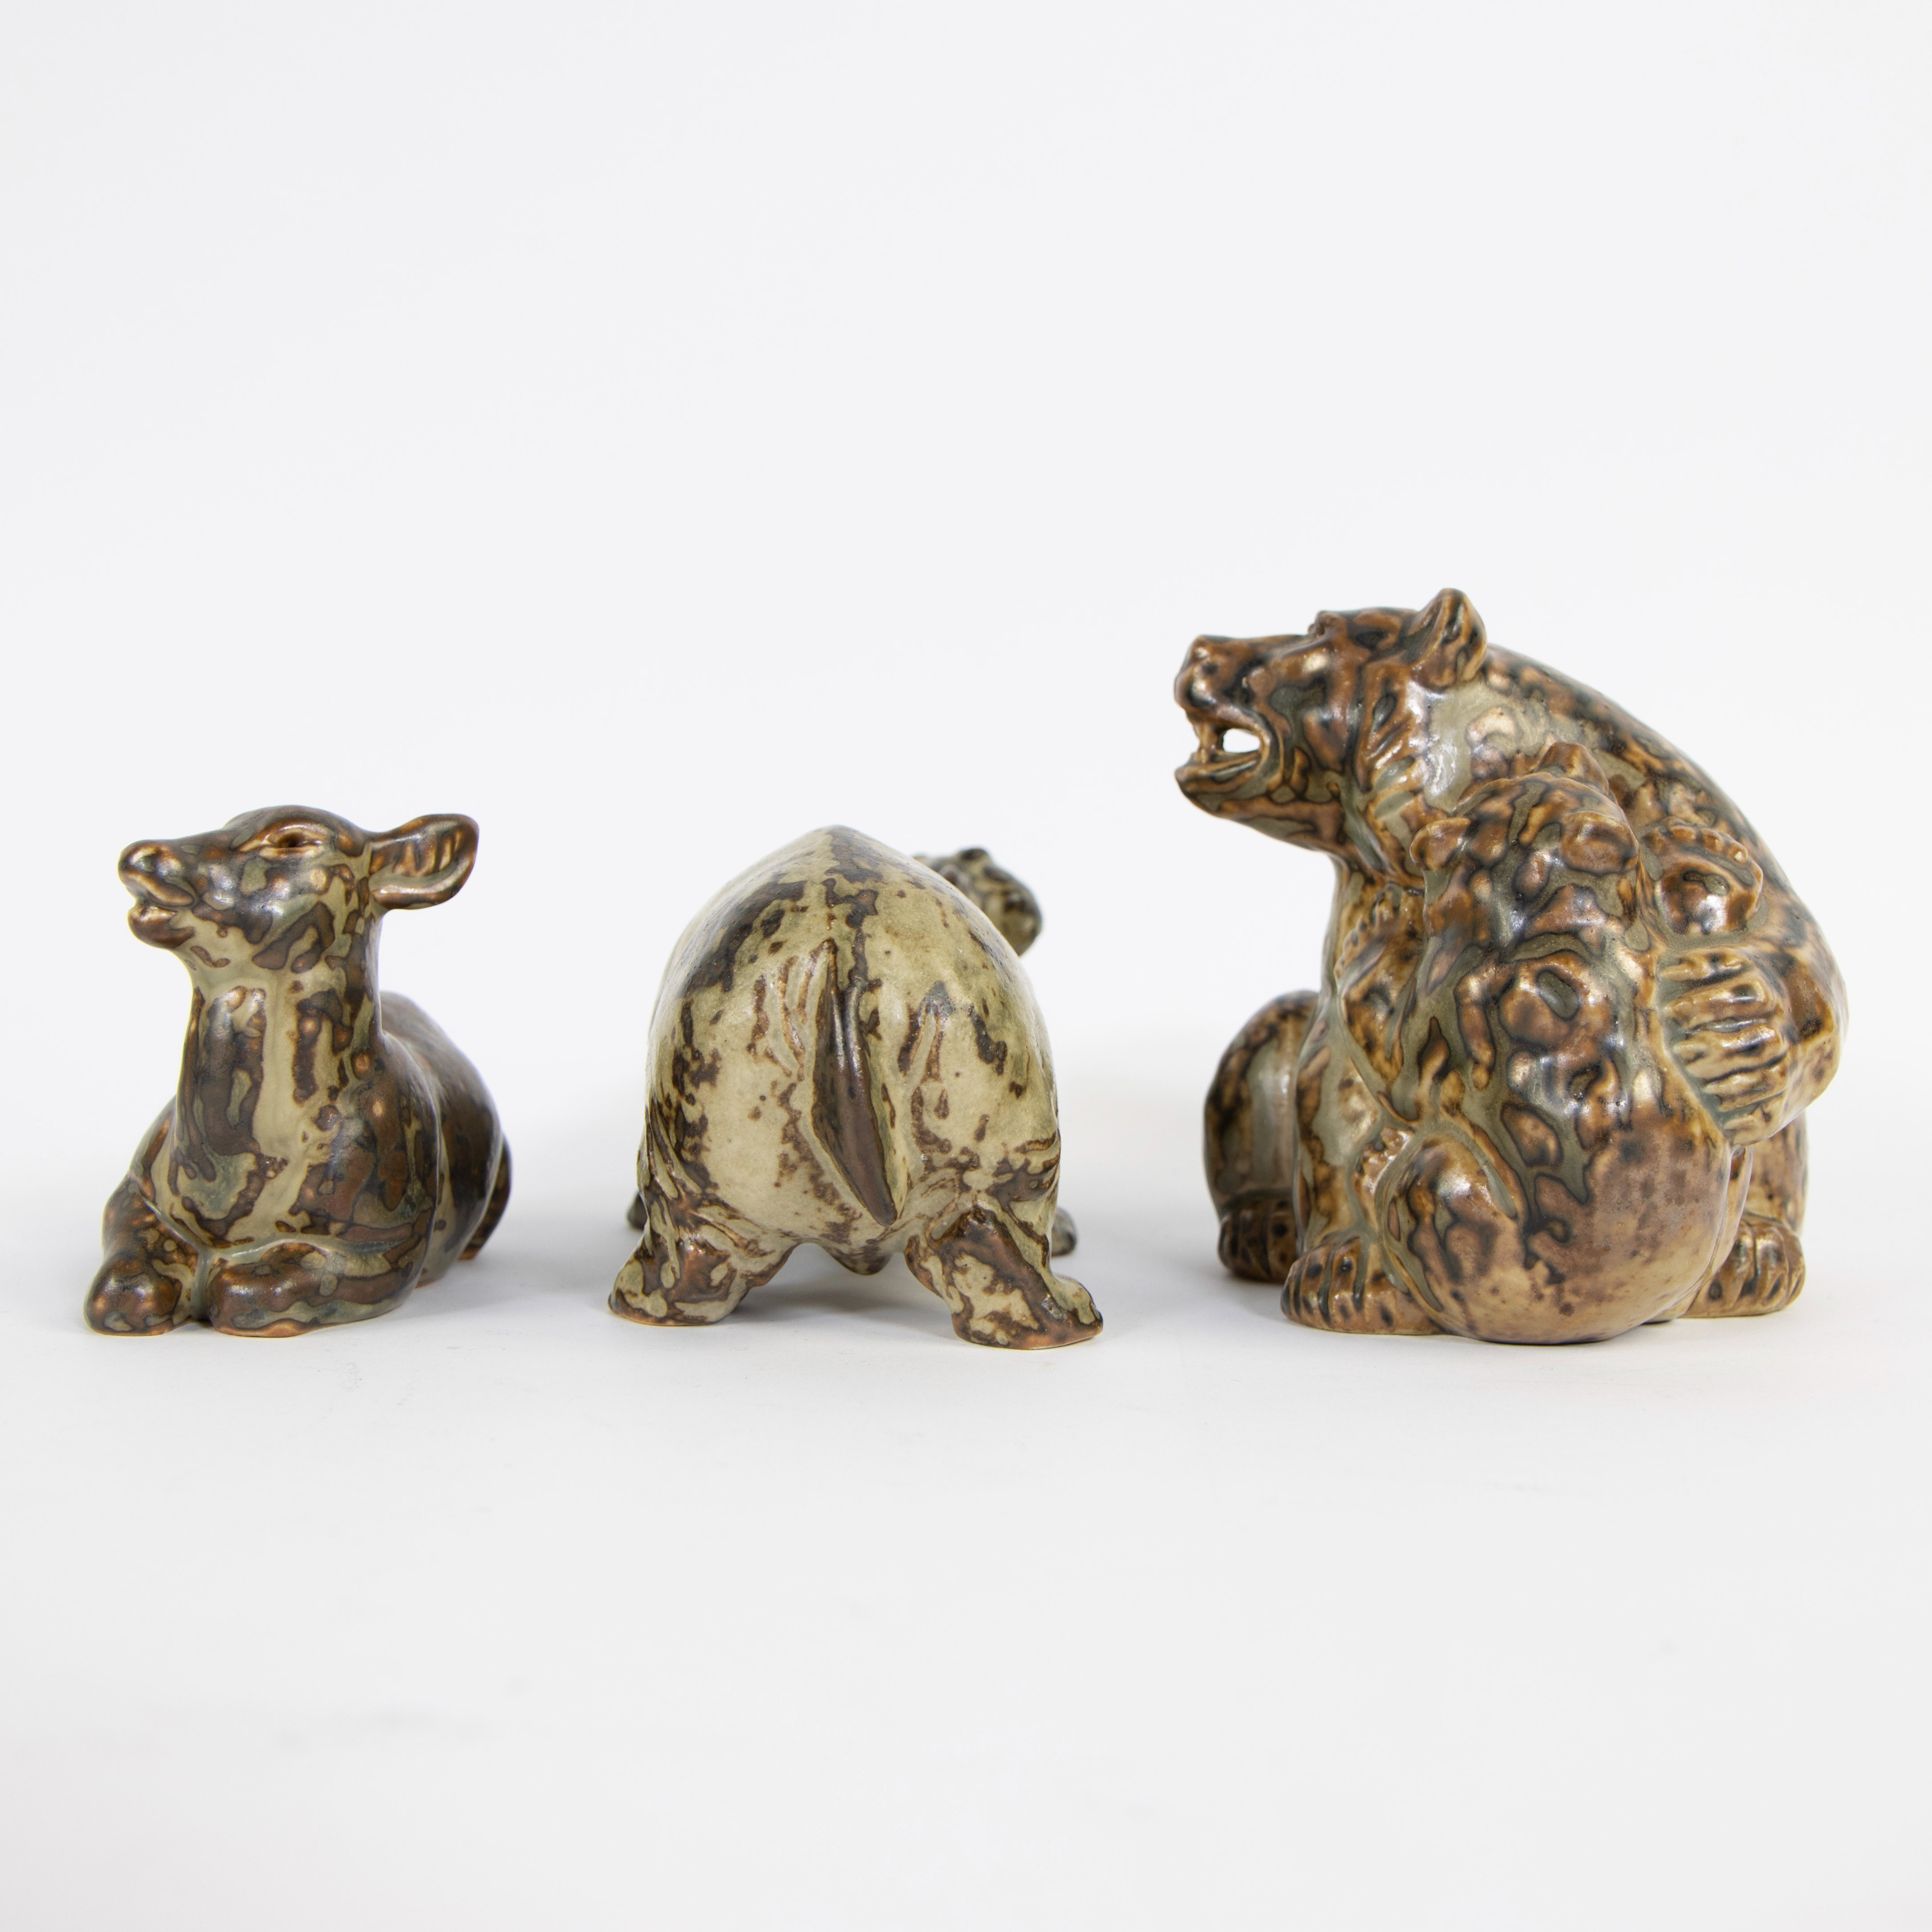 Lot Danish earthenware plate and 3 Royal Copenhagen figurines of animals, marked - Image 3 of 6